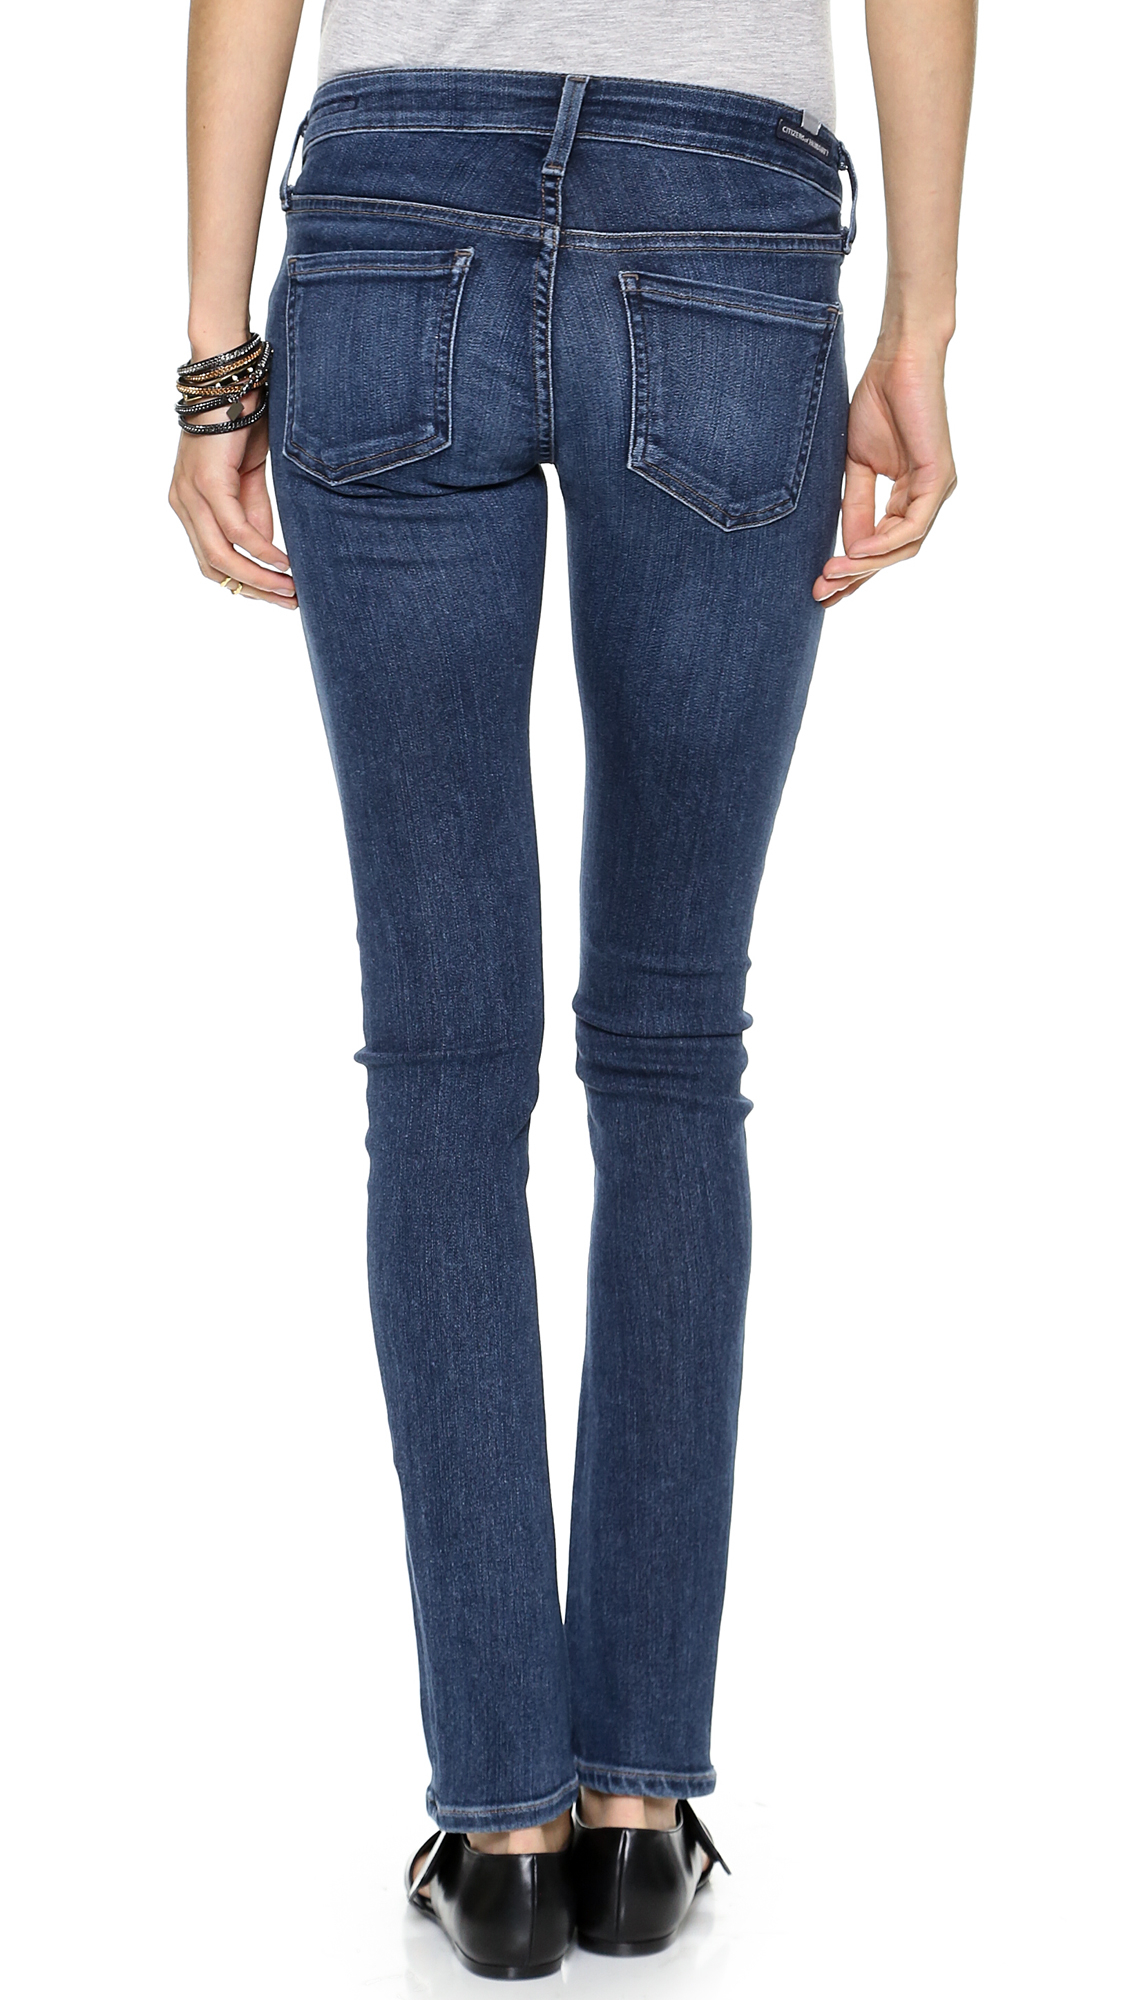 Citizens of humanity ultra skinny jeans - Alta California